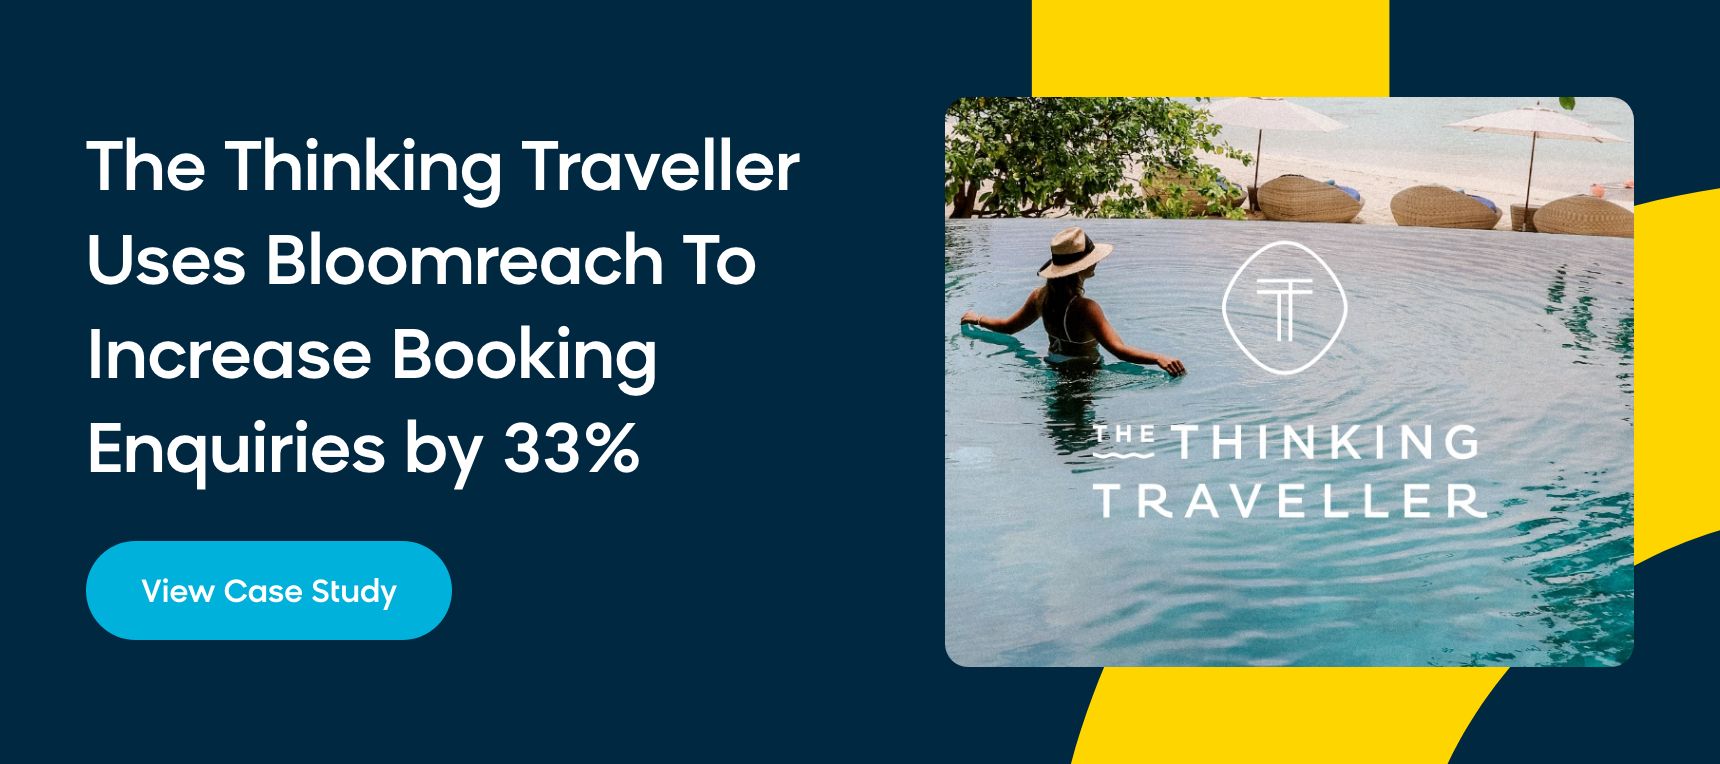 The Thinking Traveller case study with Bloomreach